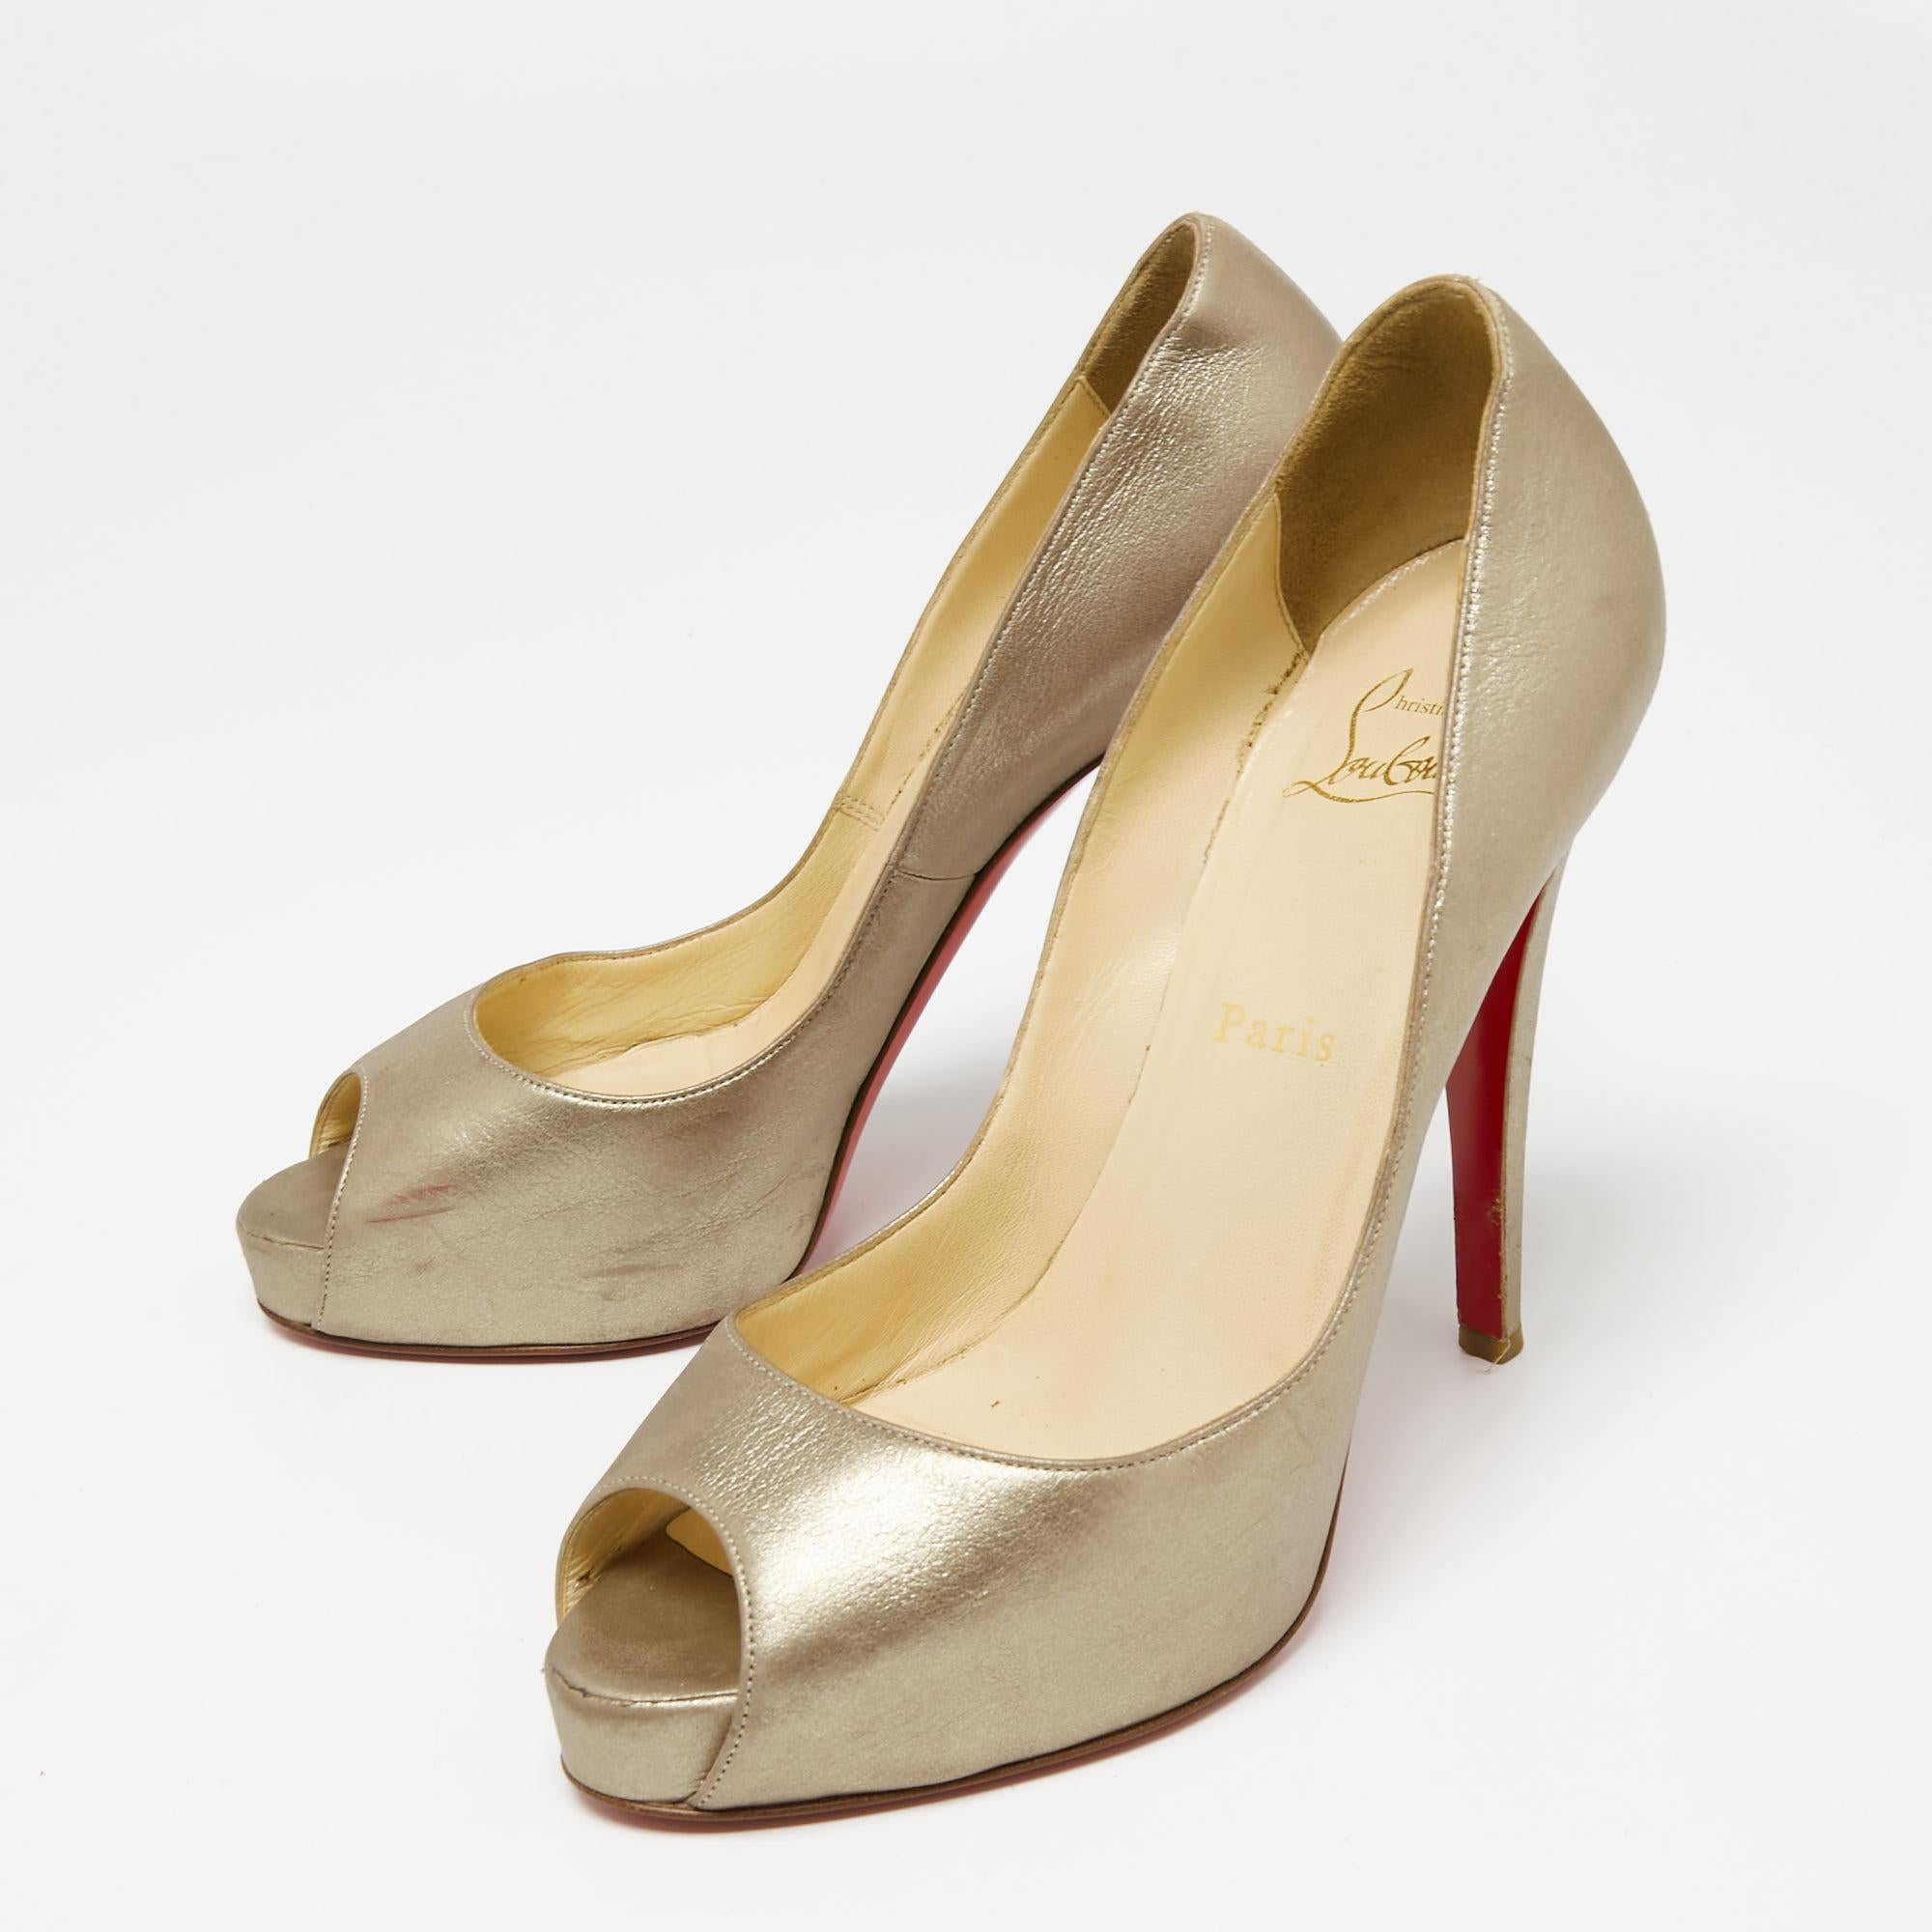 This pair of Christian Louboutin pumps is a timeless classic. Step out in style while flaunting these metallic beige leather pumps, ideal for all occasions. They feature peep toes, smooth insoles, and 12 cm heels.

